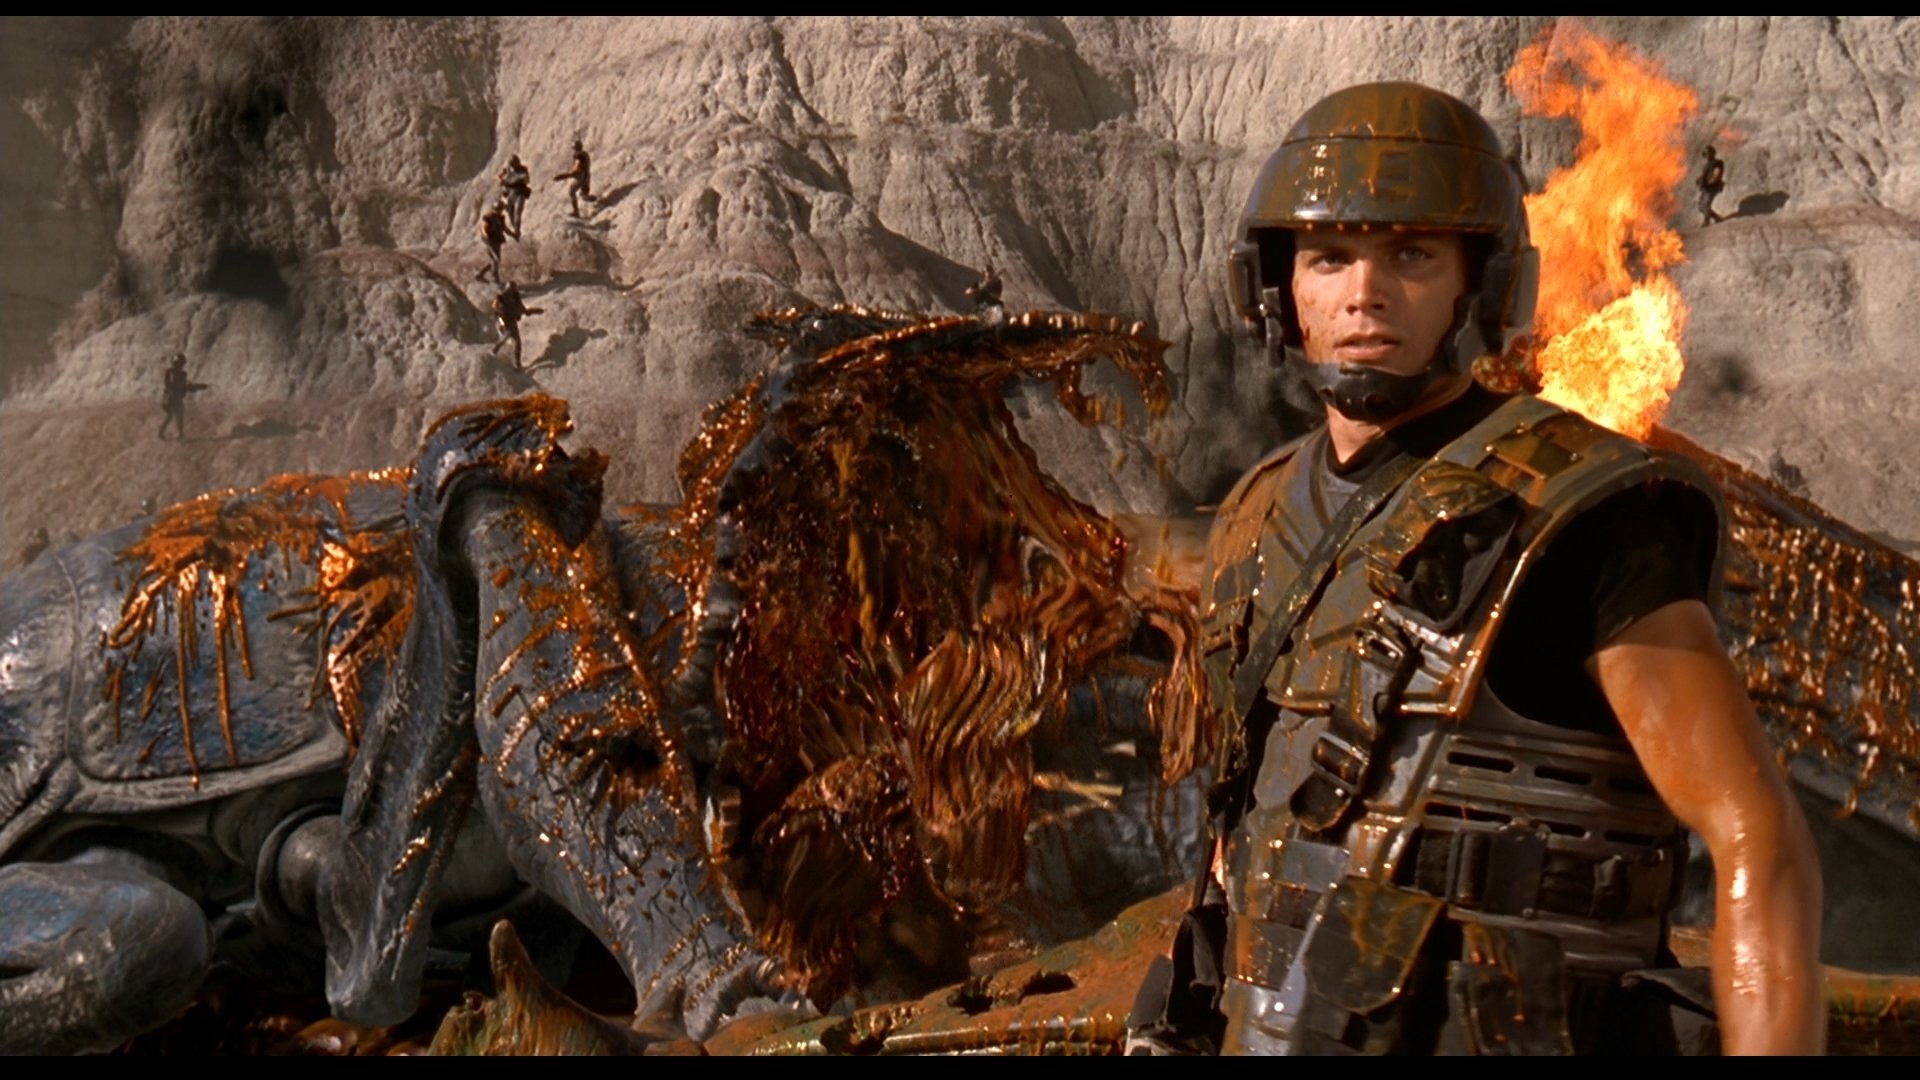 Starship Troopers 9 19201080 HD Wallpapers Pinterest Hd wallpaper and Wallpaper